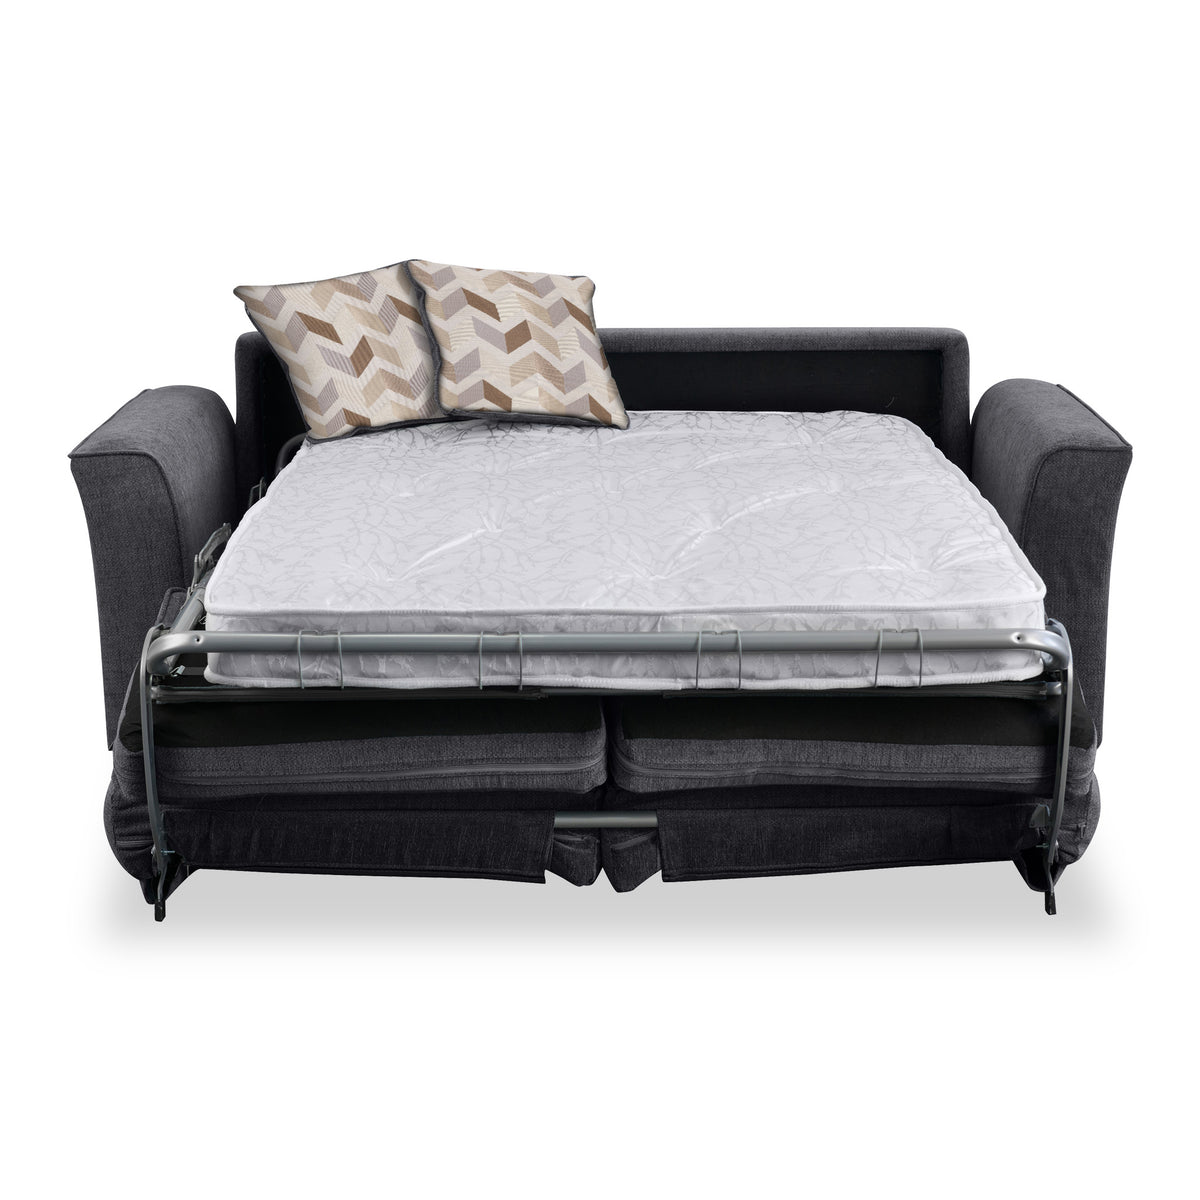 Abbott 2 Seater Sofabed in Charcoal with Morelisa Oatmeal Cushions by Roseland Furniture